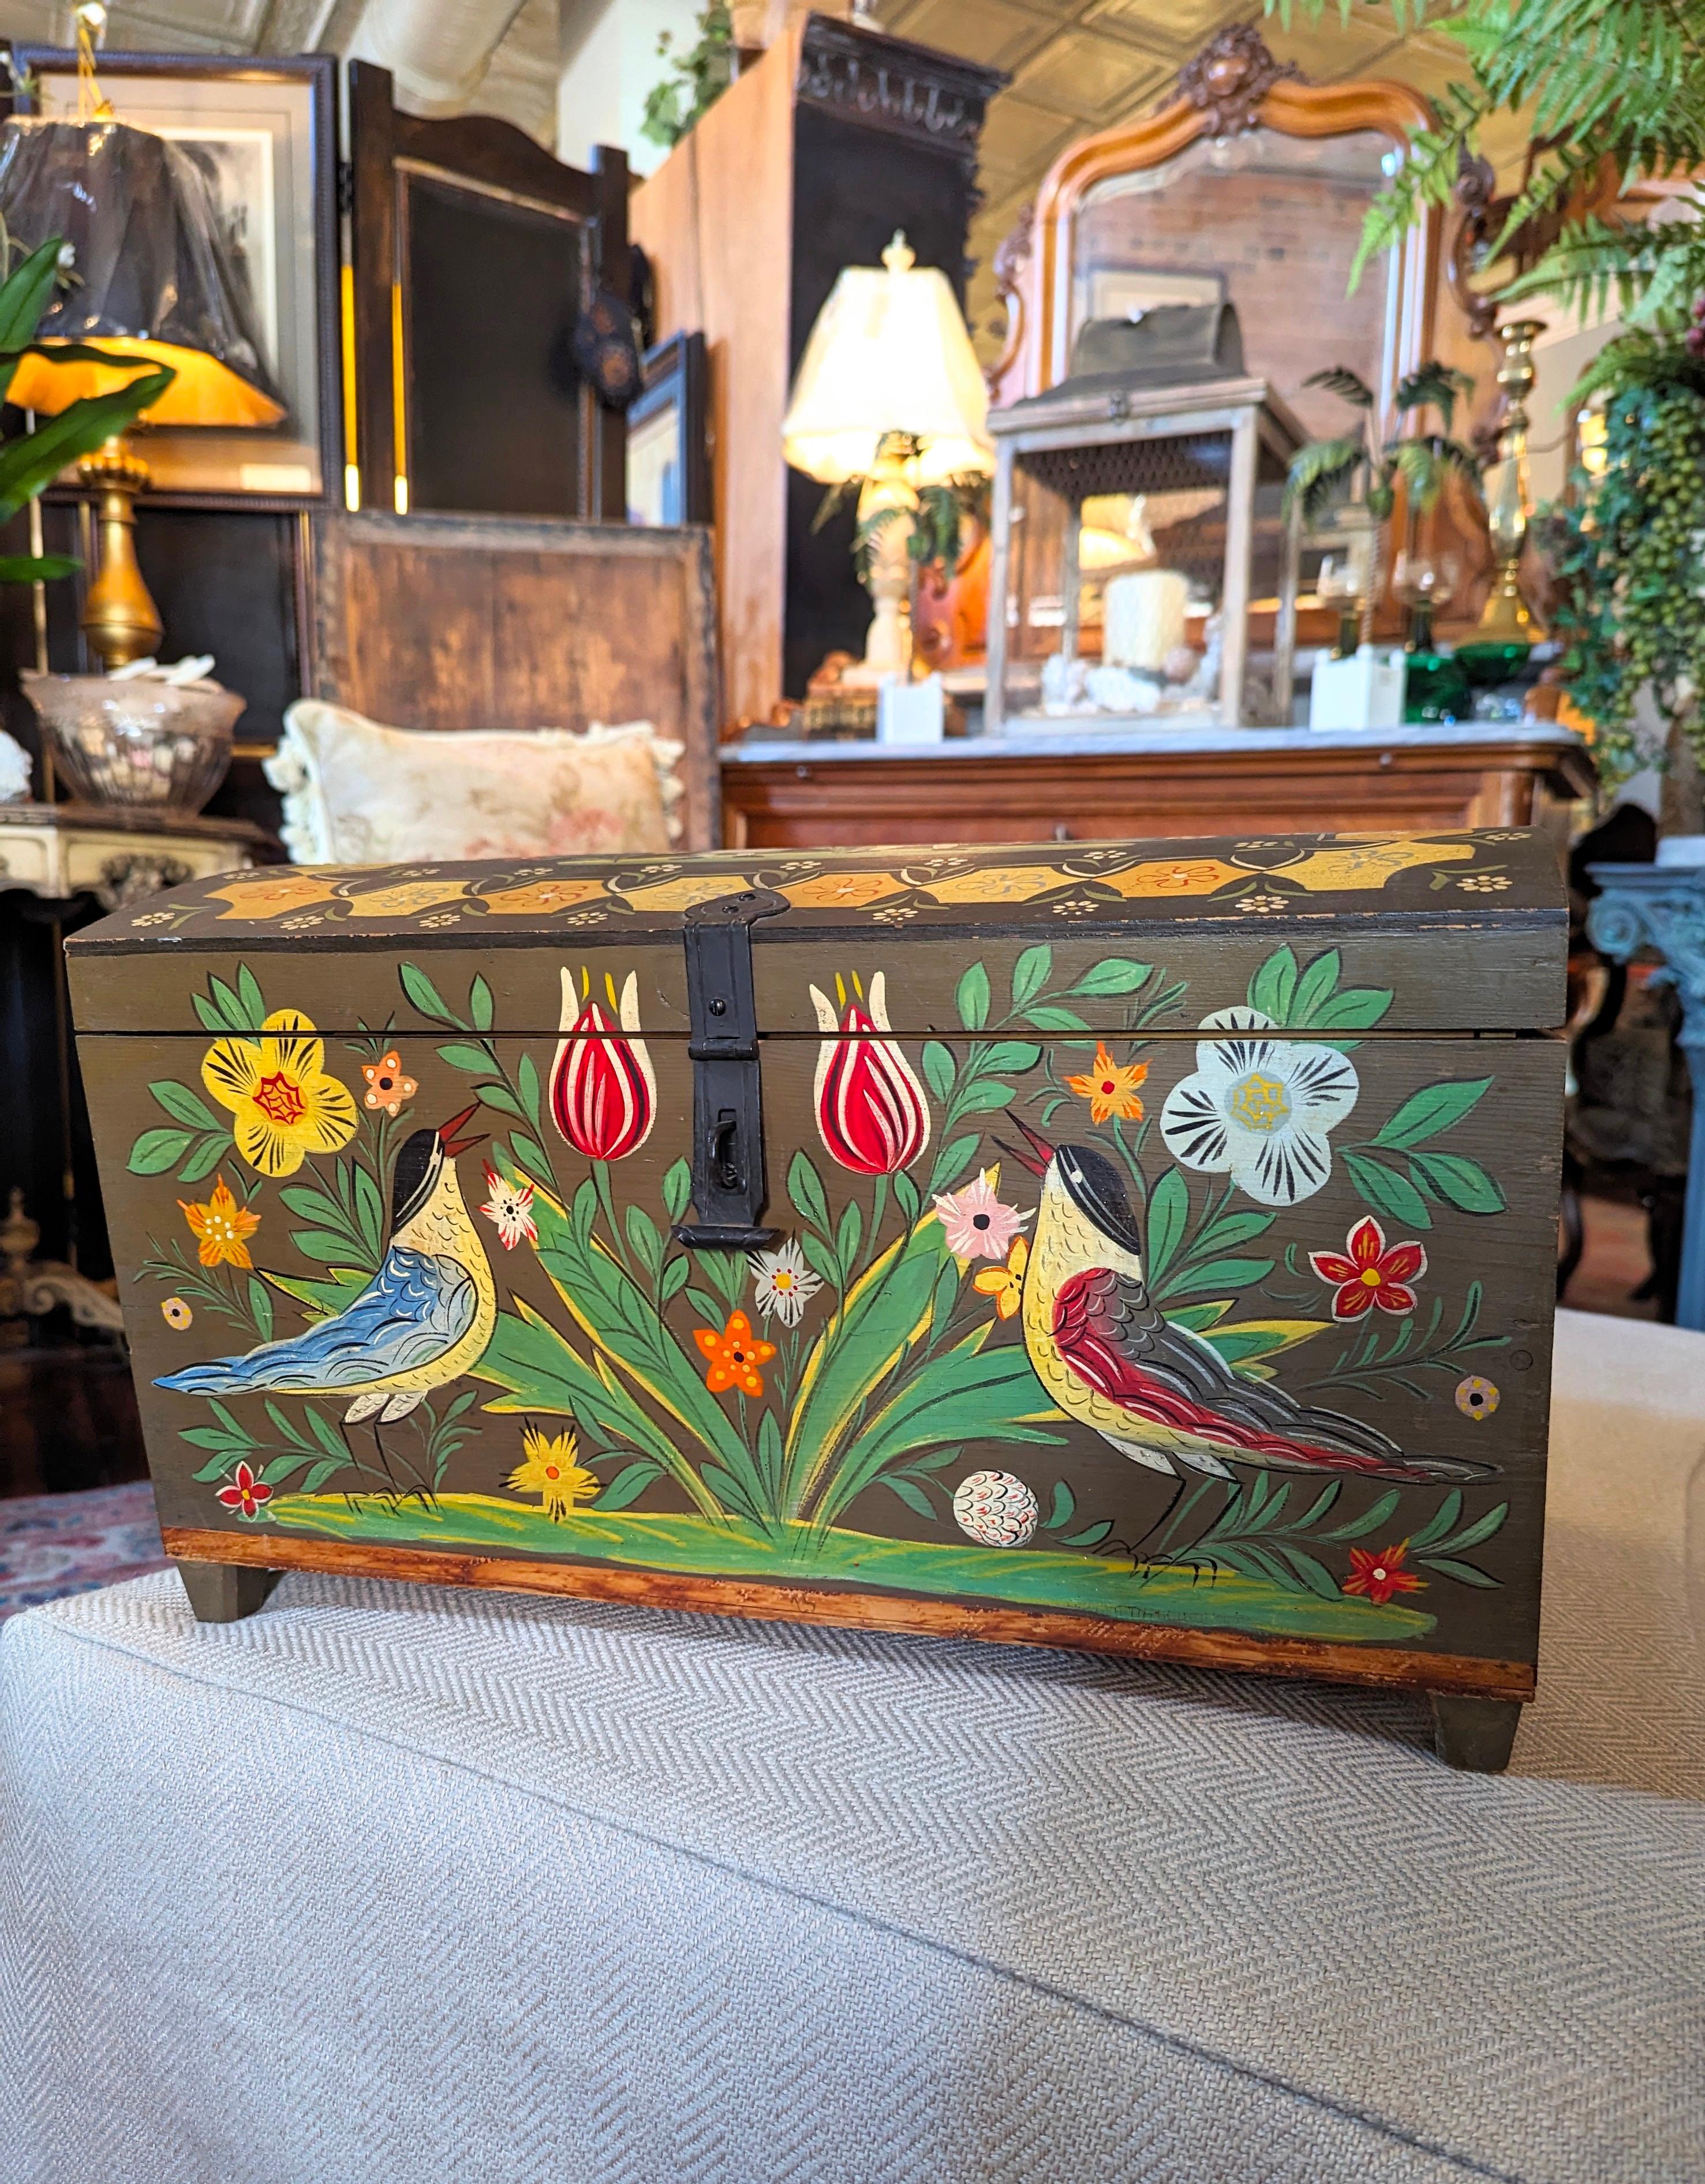 Vintage hand painted and hand crafted domed chest with an elaborate folk art scene throughout the entire box. Stunning artwork with florals, birds, and a courting scene on wood. This small to medium sized chest measures 16.5 inches in width by 9